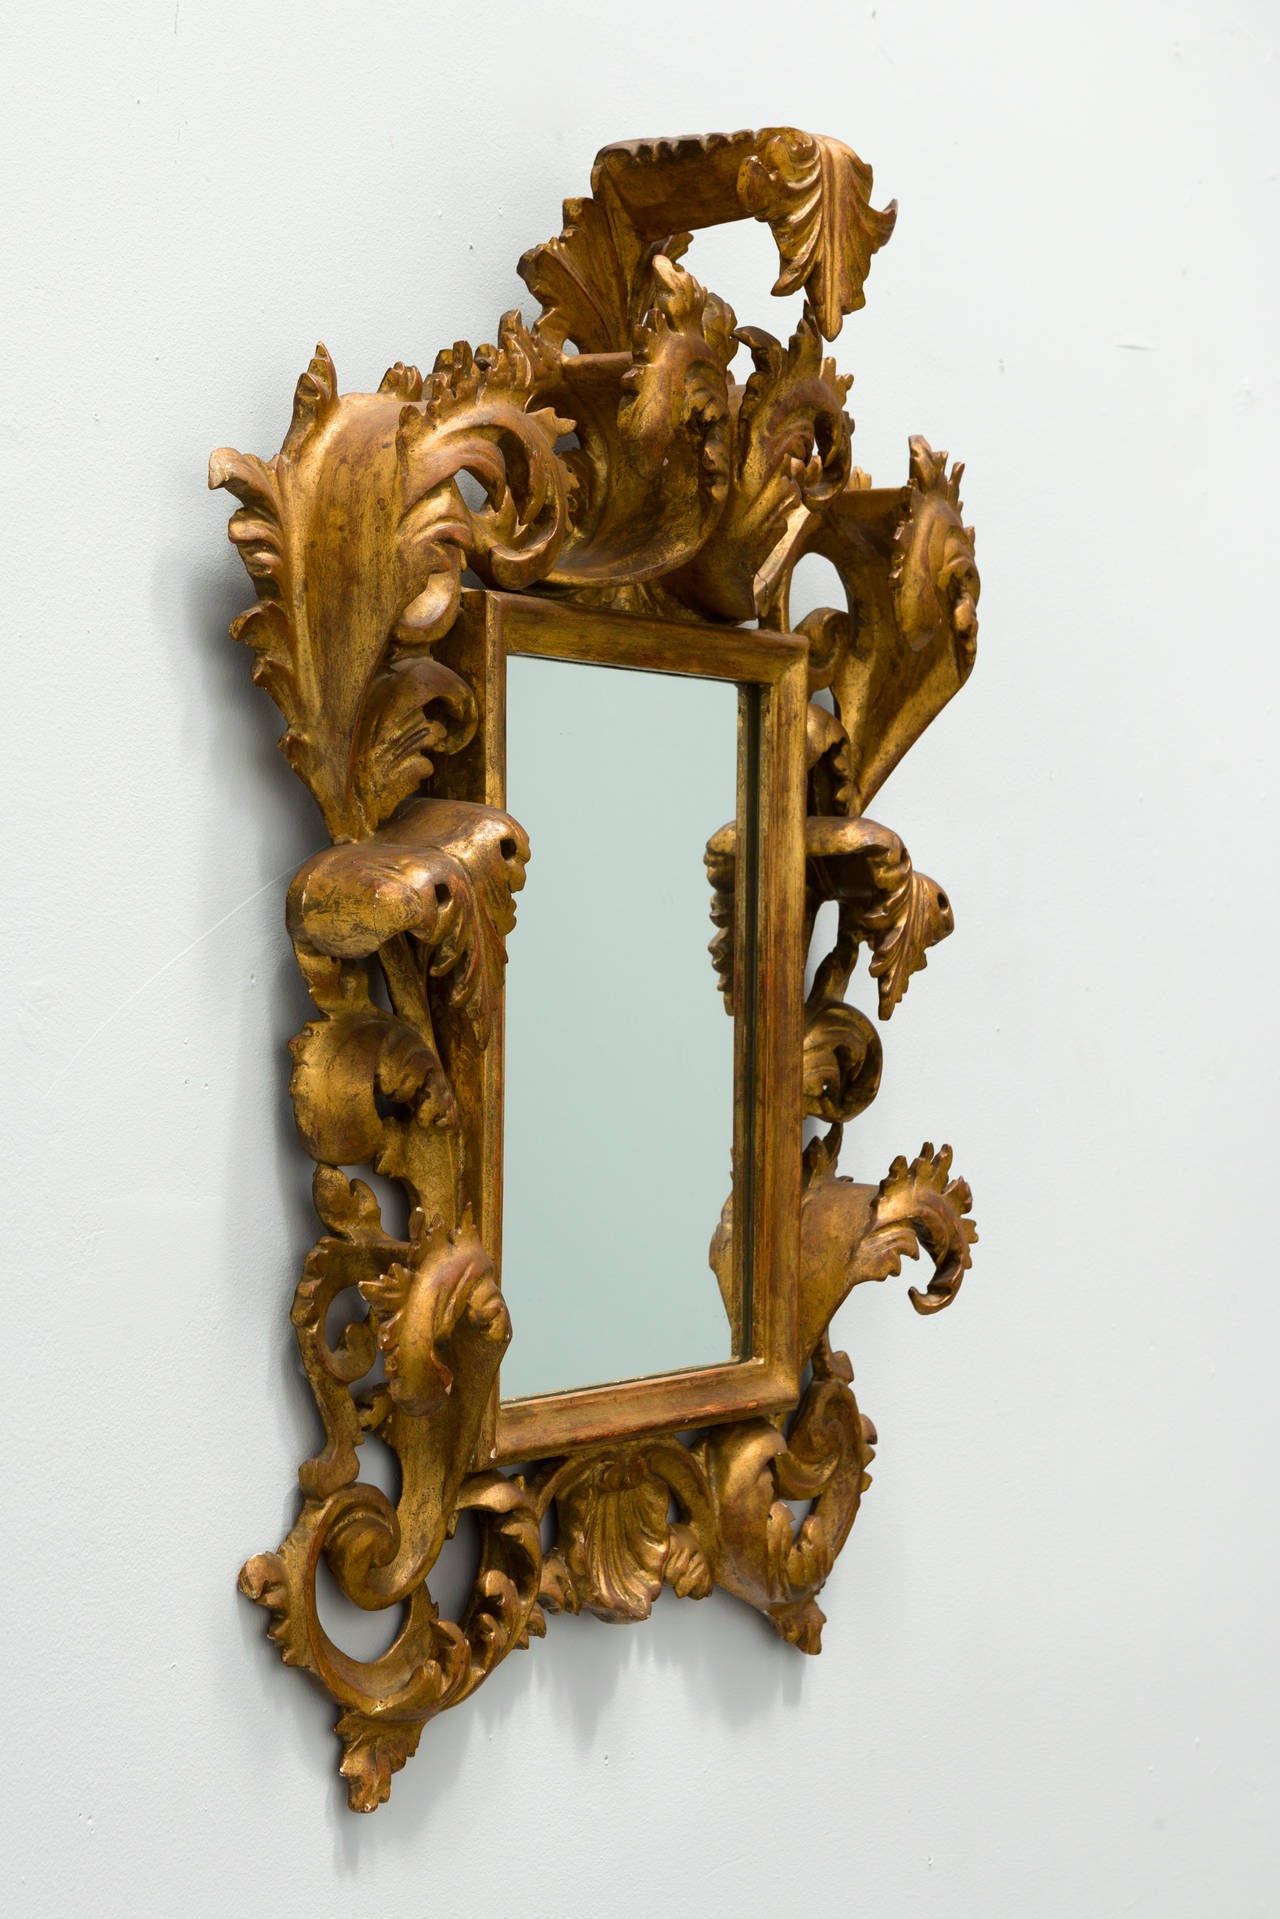 French Giltwood Rococo Style Wall Mirror For Sale at 1stdibs